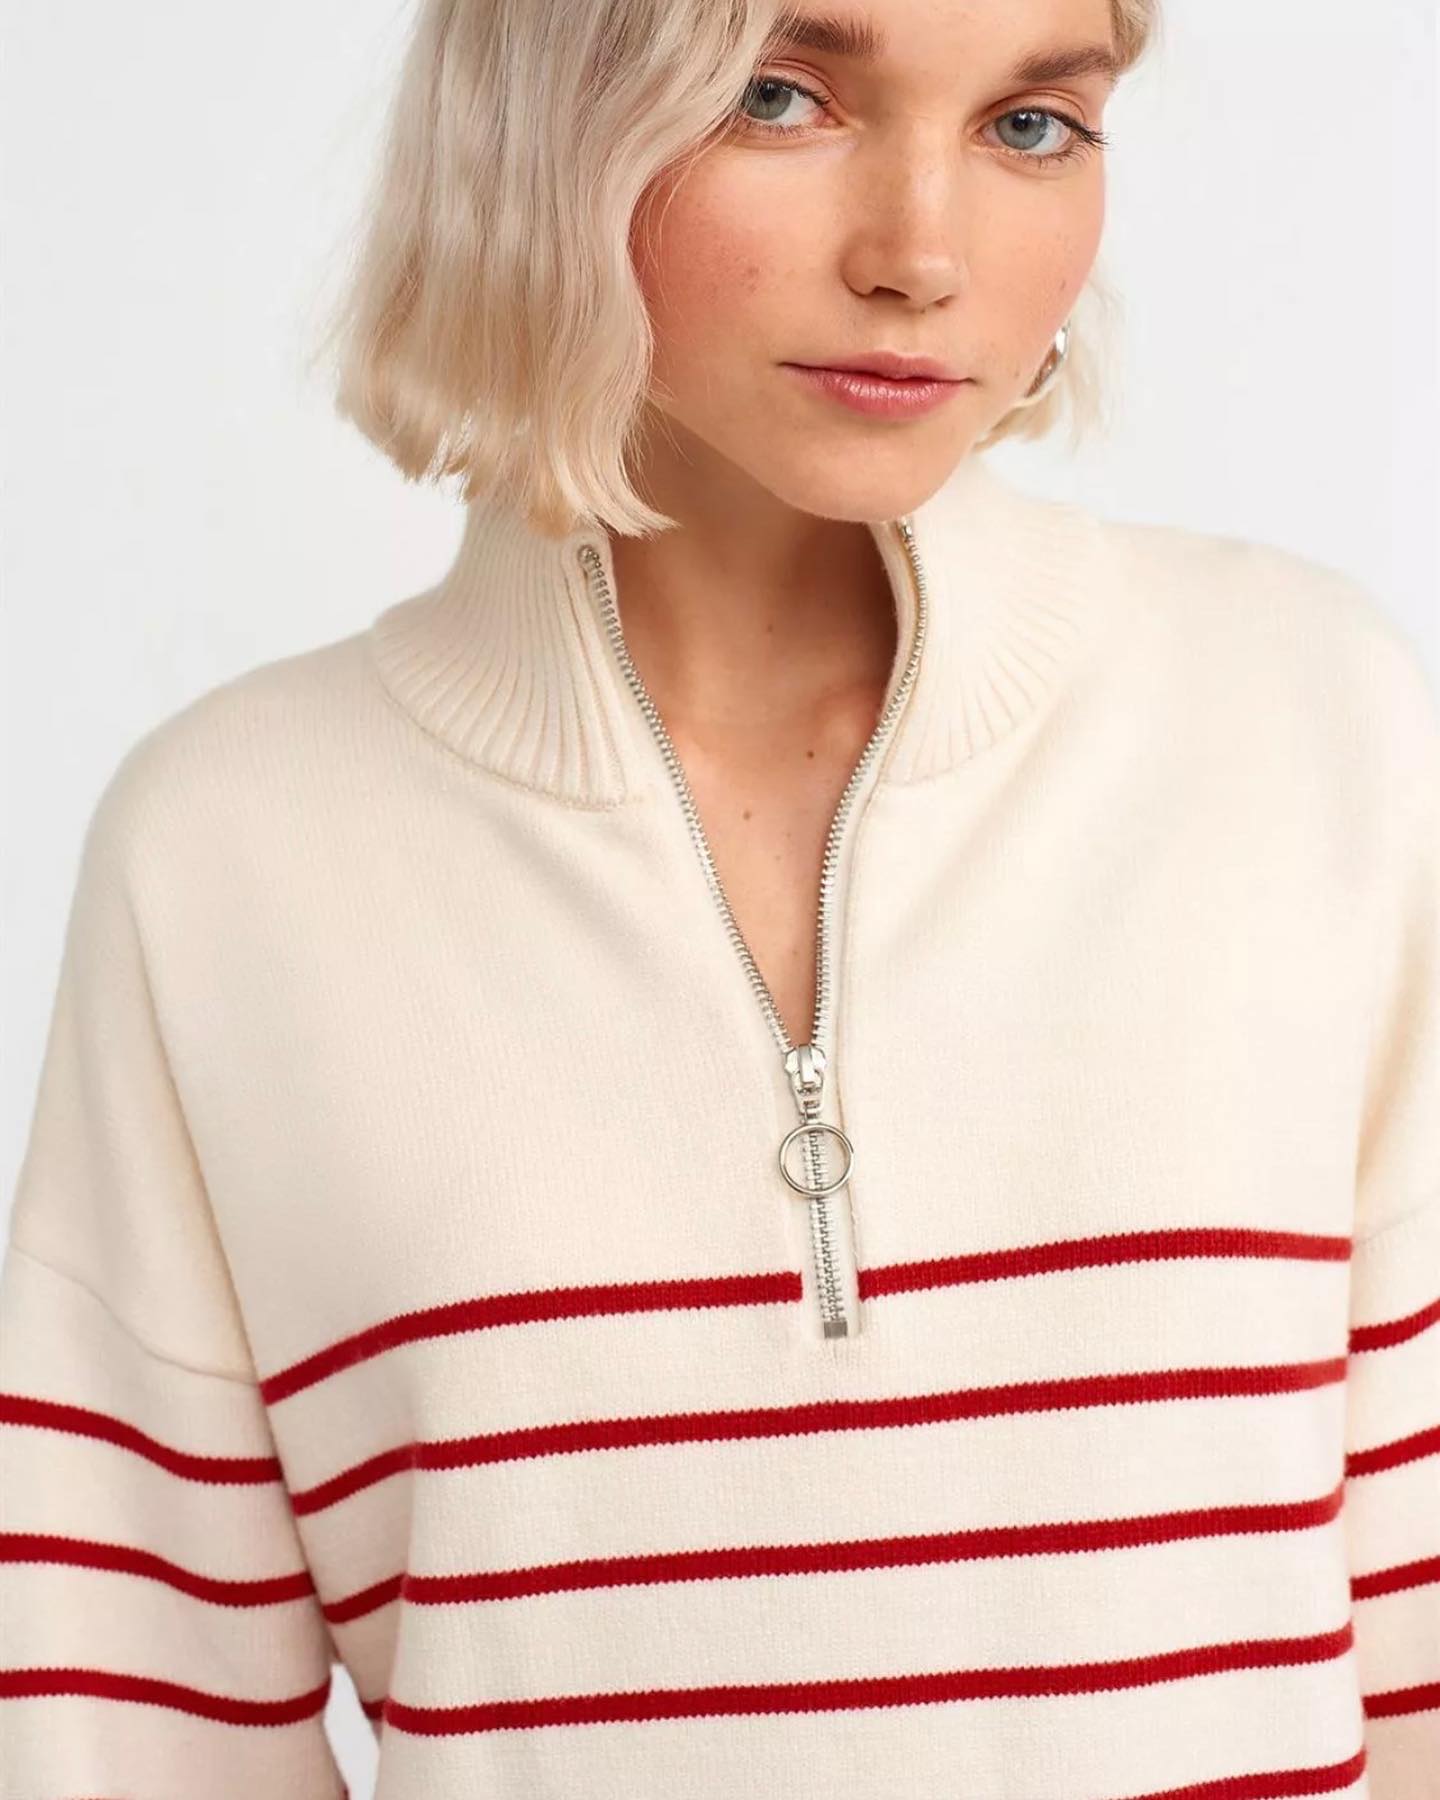 Stand-up Collar Zipper Striped Knitted Sweater